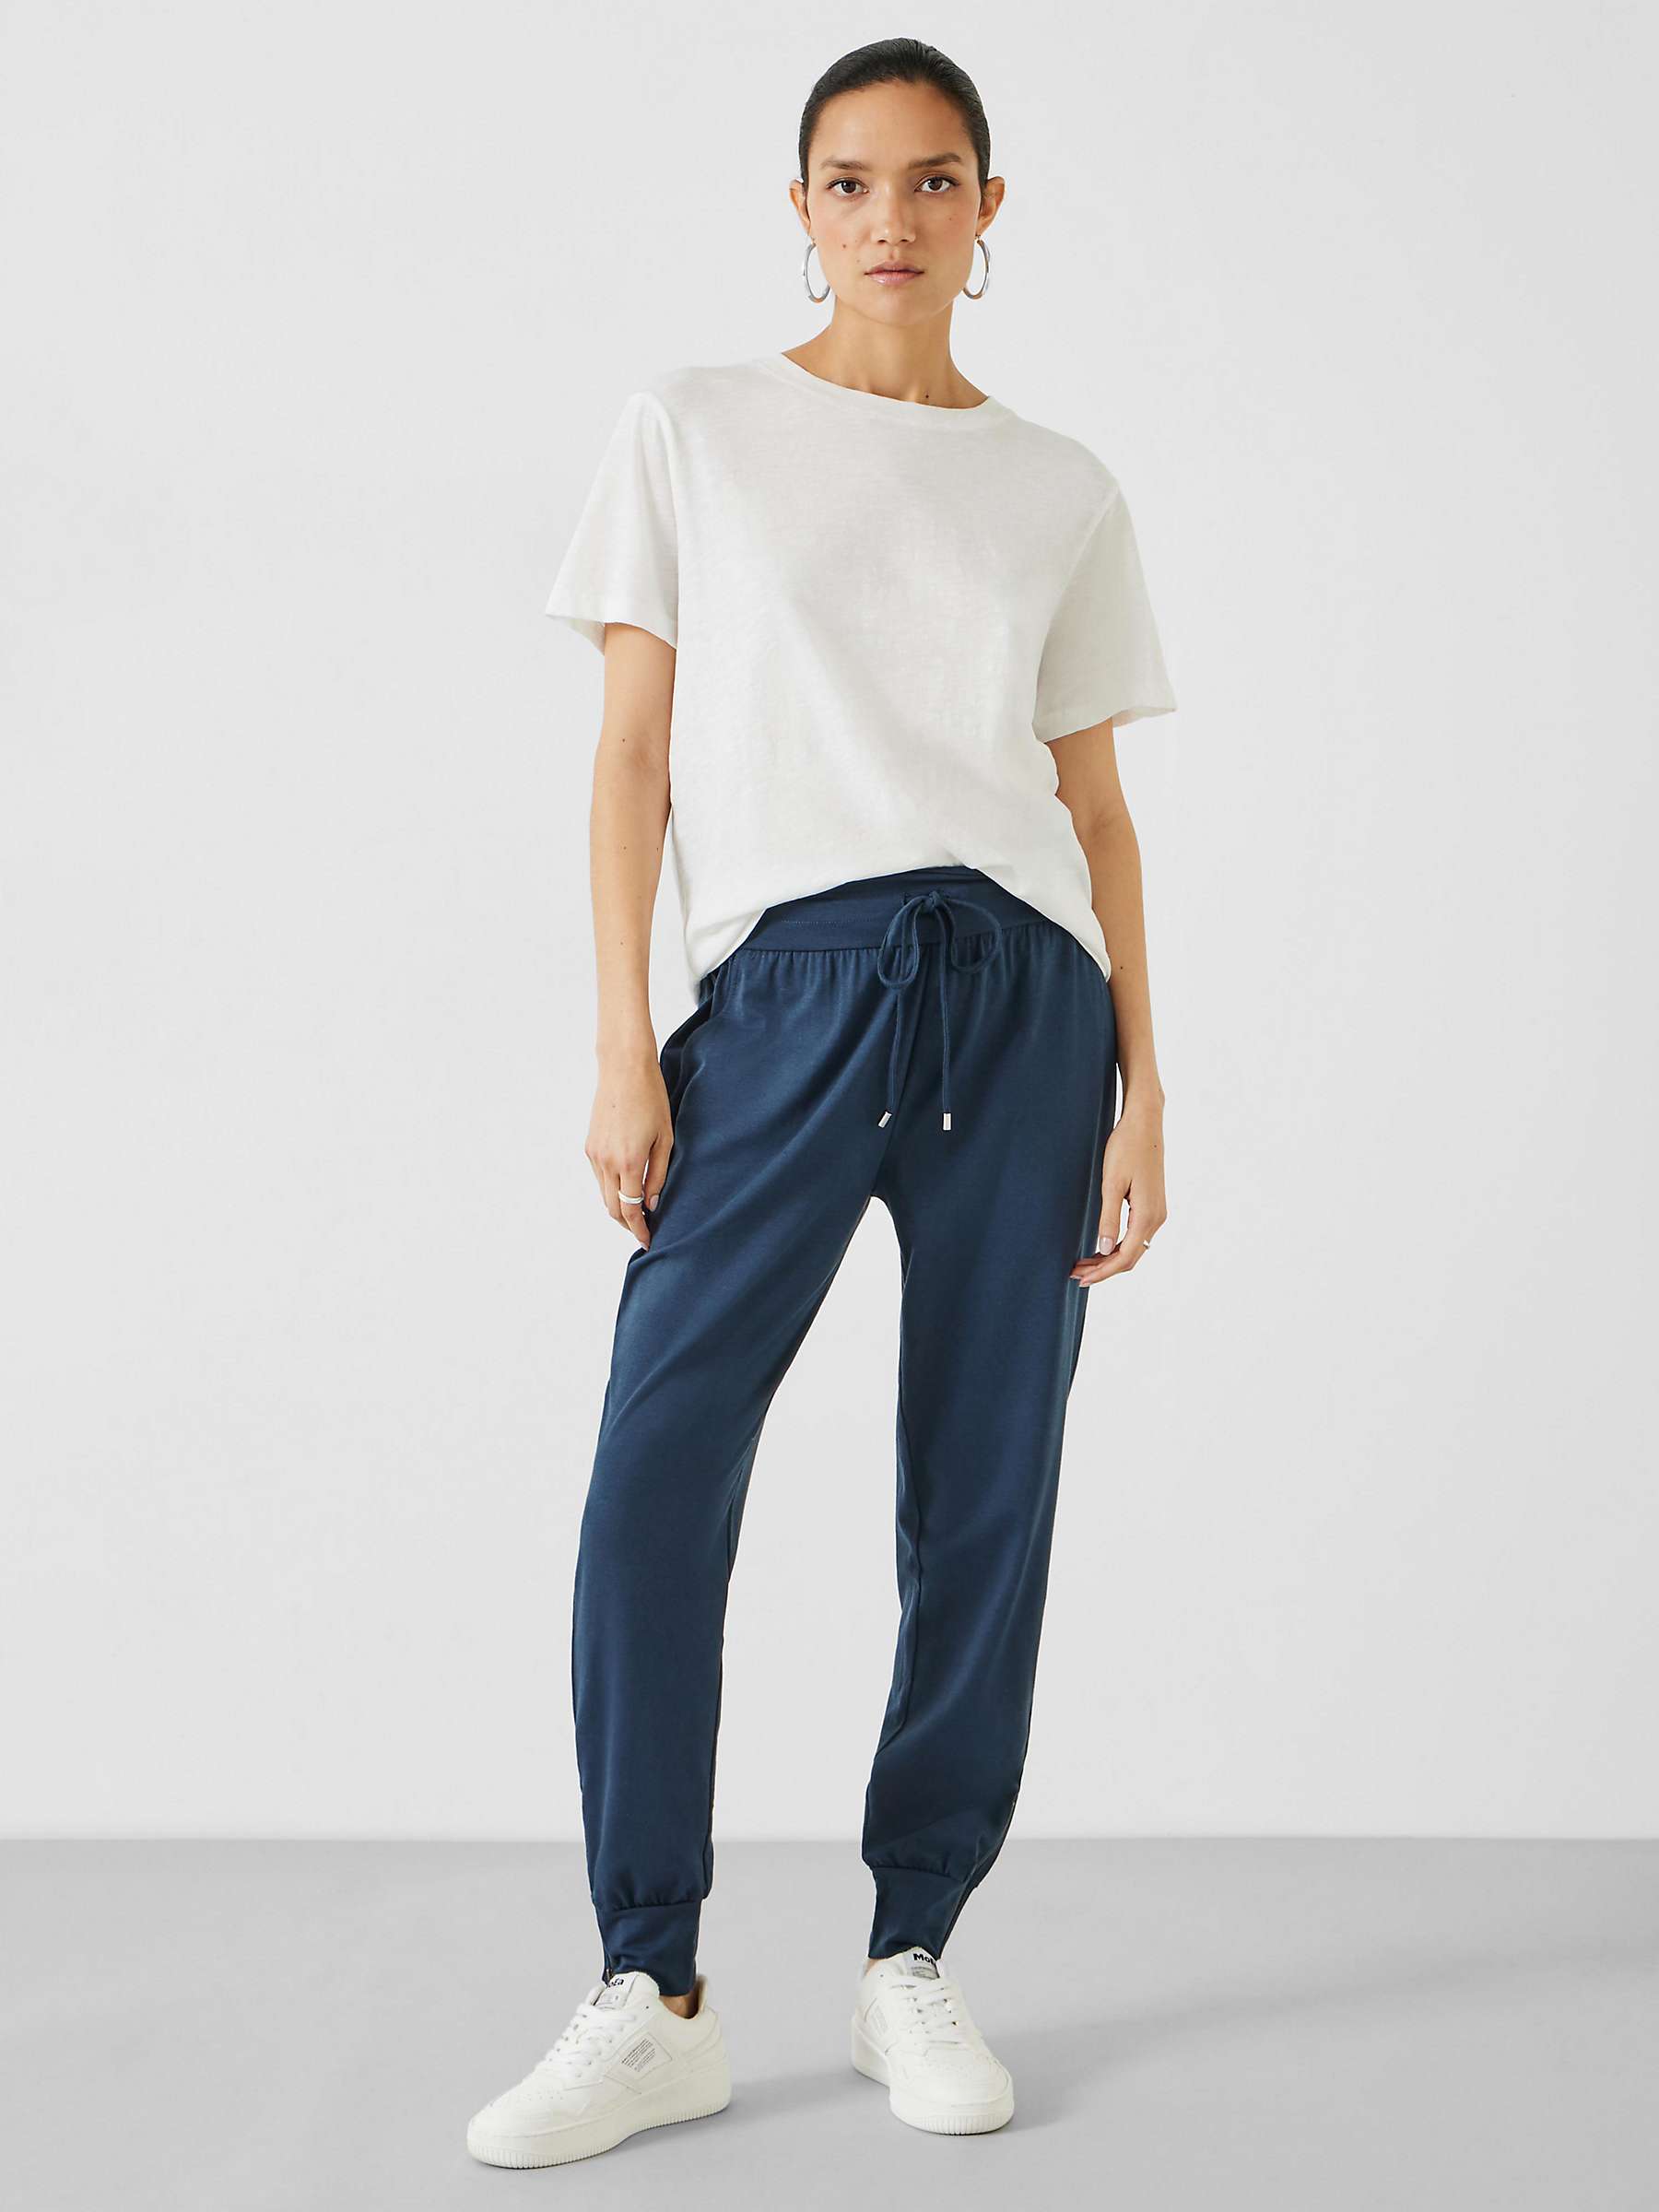 Buy hush Amie Joggers Online at johnlewis.com